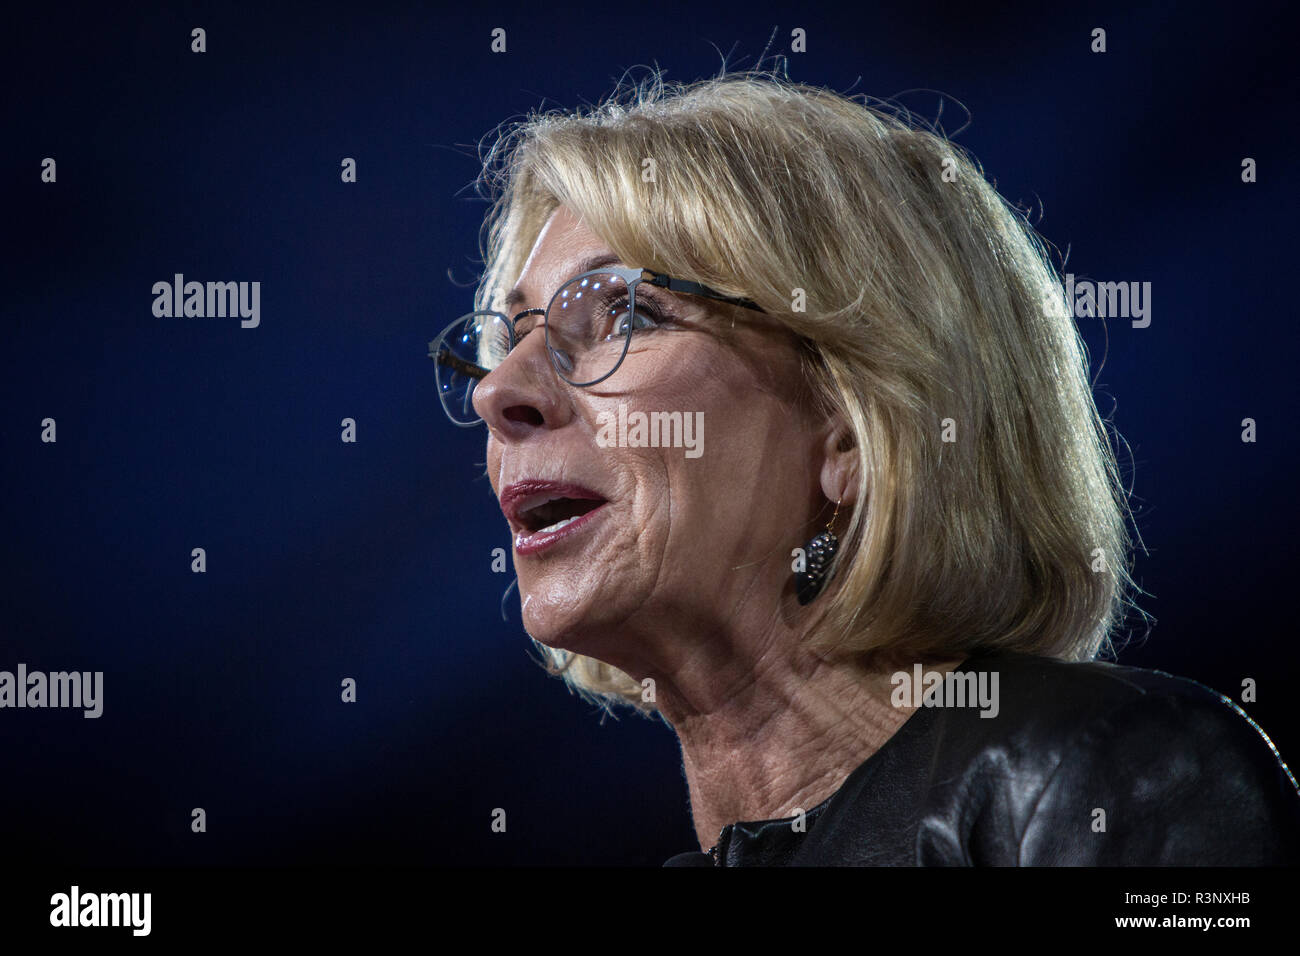 Businesswoman, philantropist and United States Secretary of Education Betsy DeVos talks at the CPAC, Conservative Political Action Conference. Stock Photo